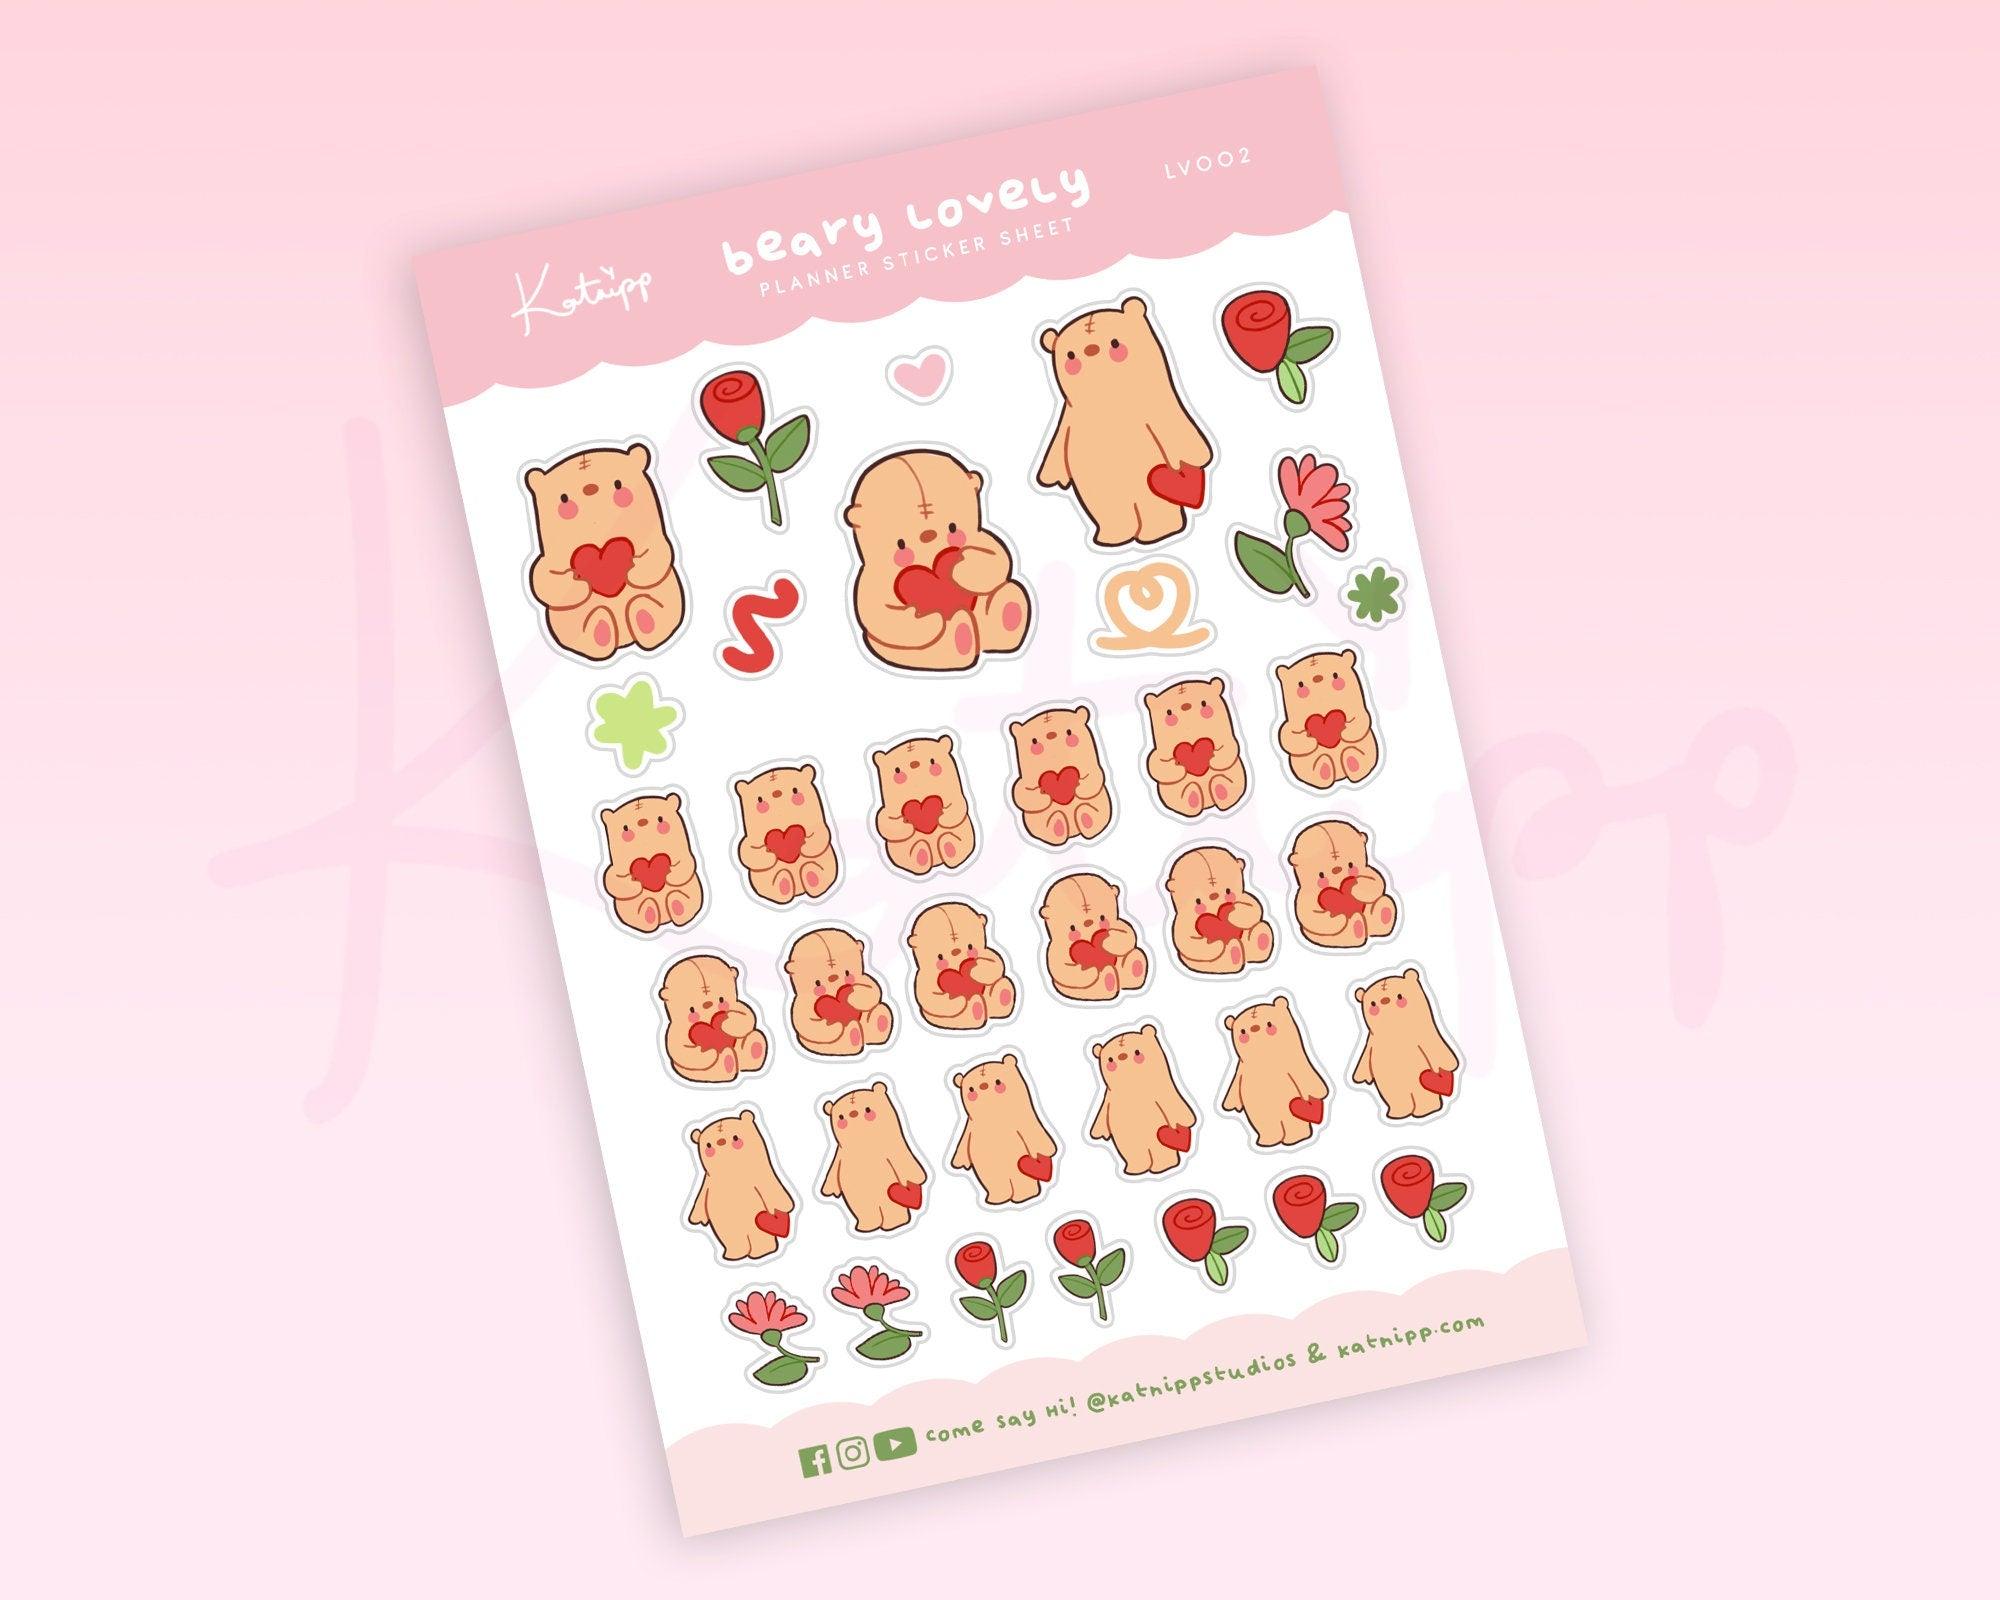 Printable planner stickers for use in mini Happy planner or personal size  planners,Valentine day stickers,February planner stickers,pink